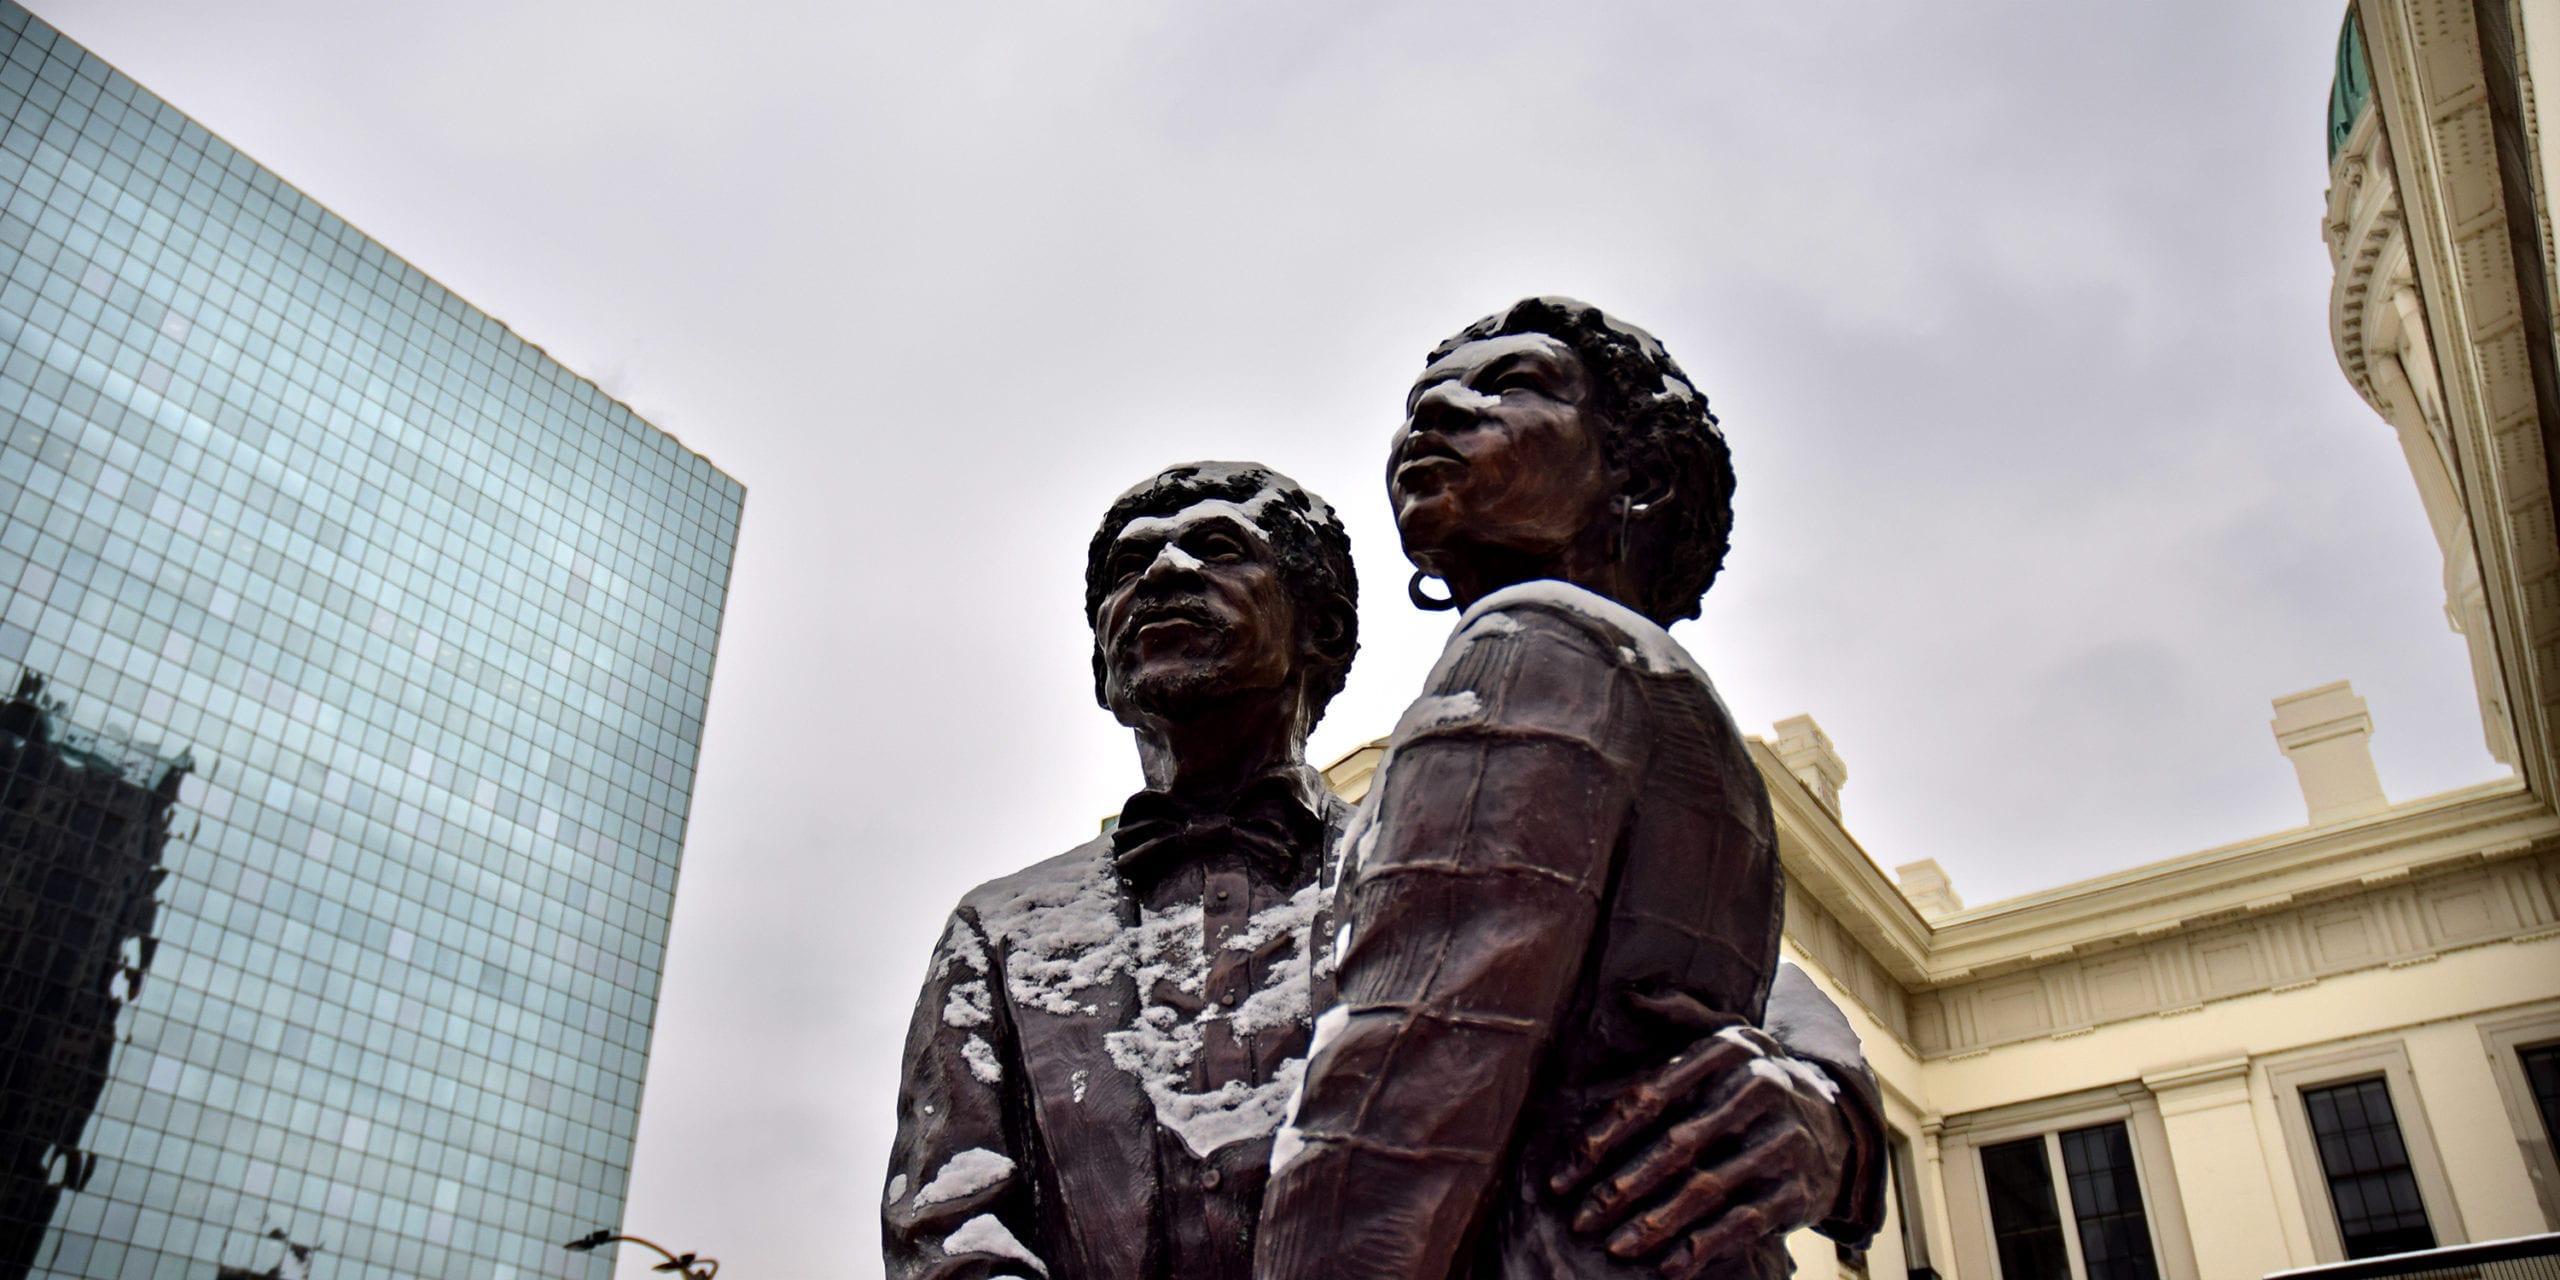 The Dred and Harriet Scott memorial statue, with Rasmussen Dickey Moore's St. Louis office in the background.